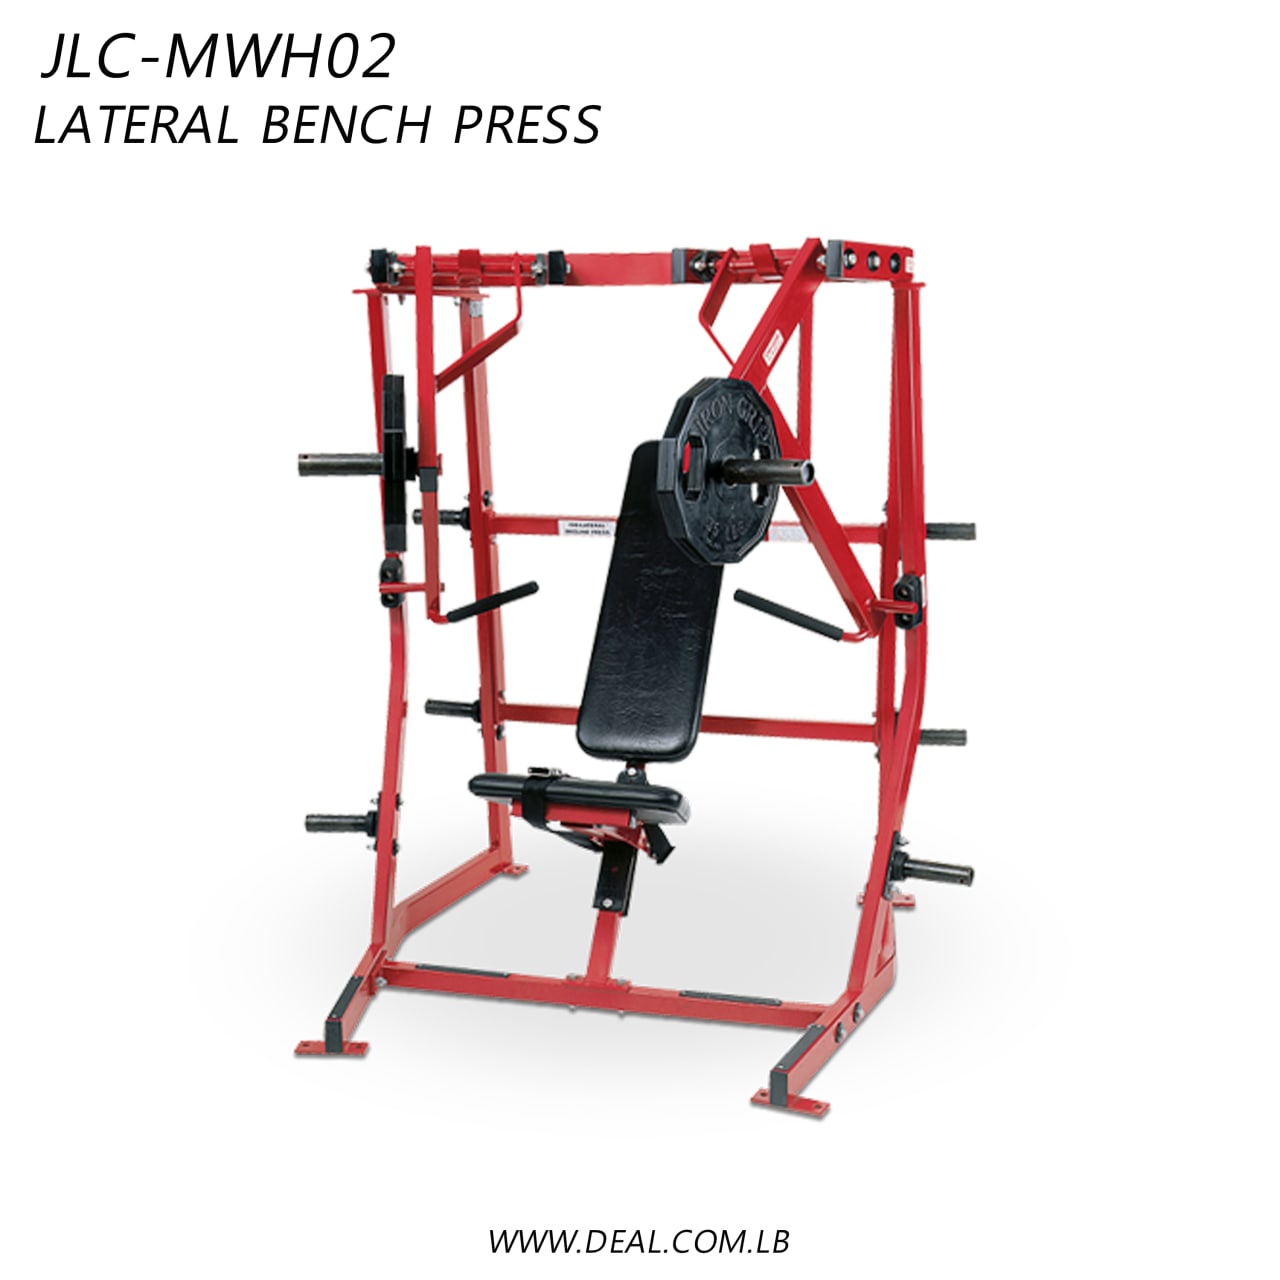 JLC-MWH02 | Lateral bench press